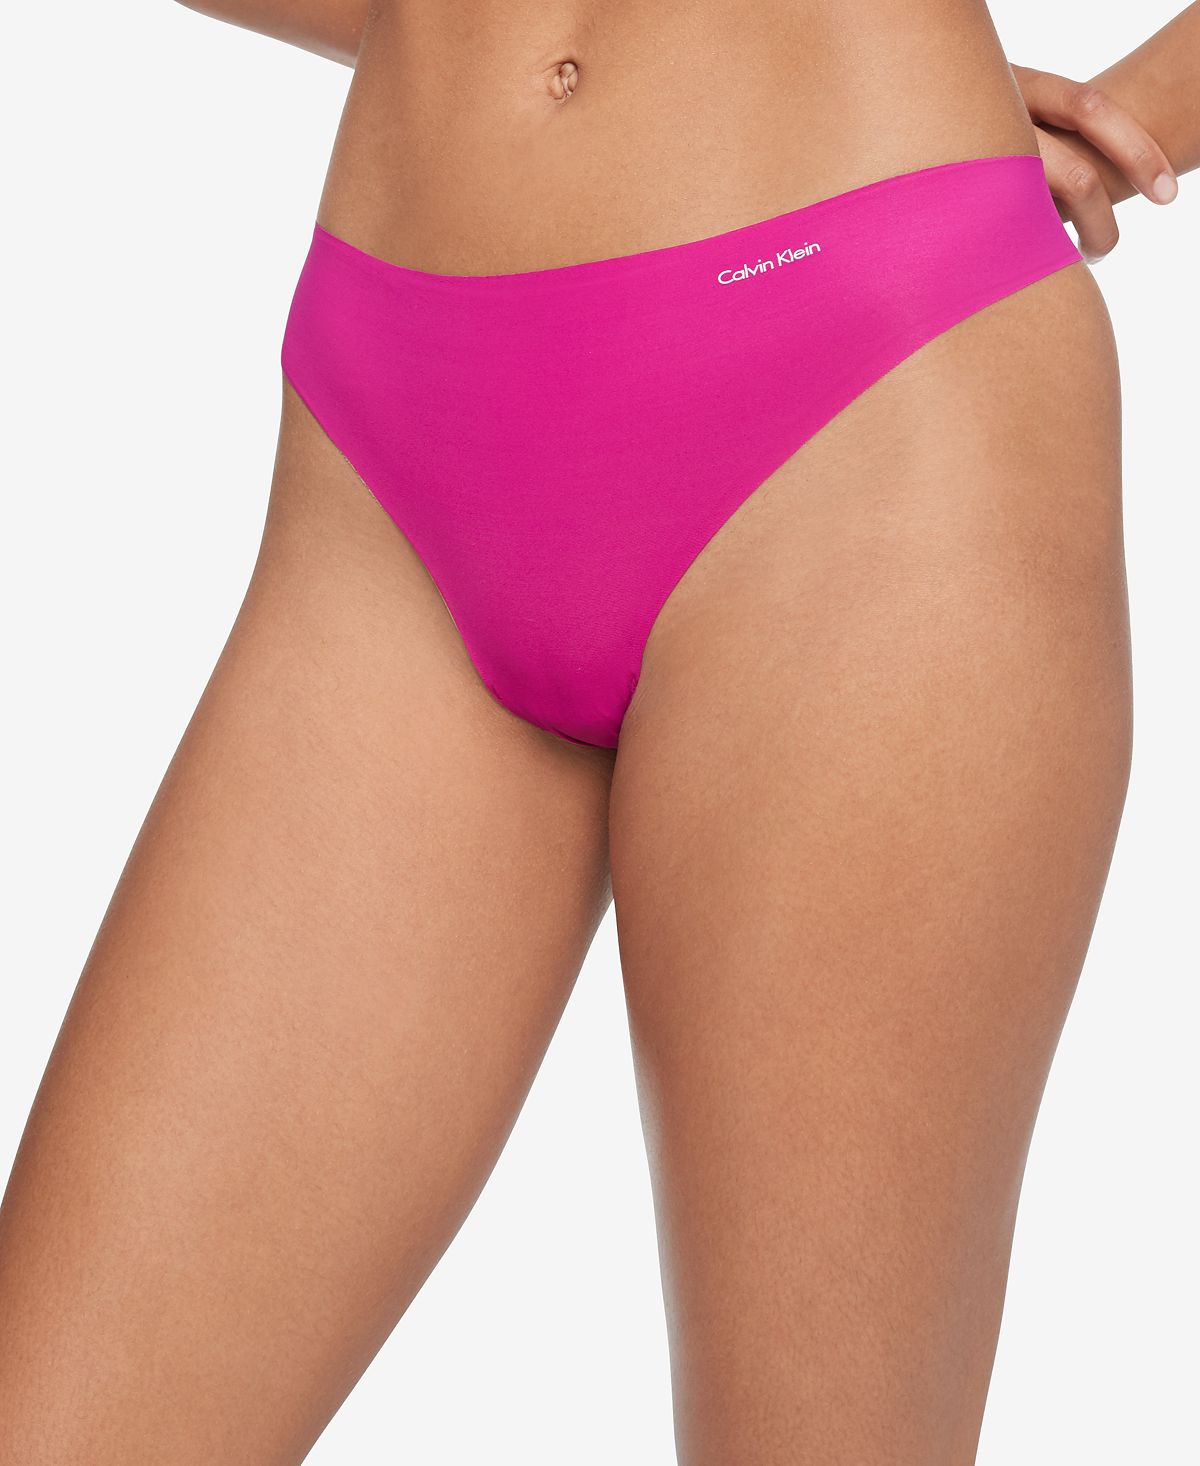 Calvin Klein Wo Invisibles Thong Underwear D3428 Charmed